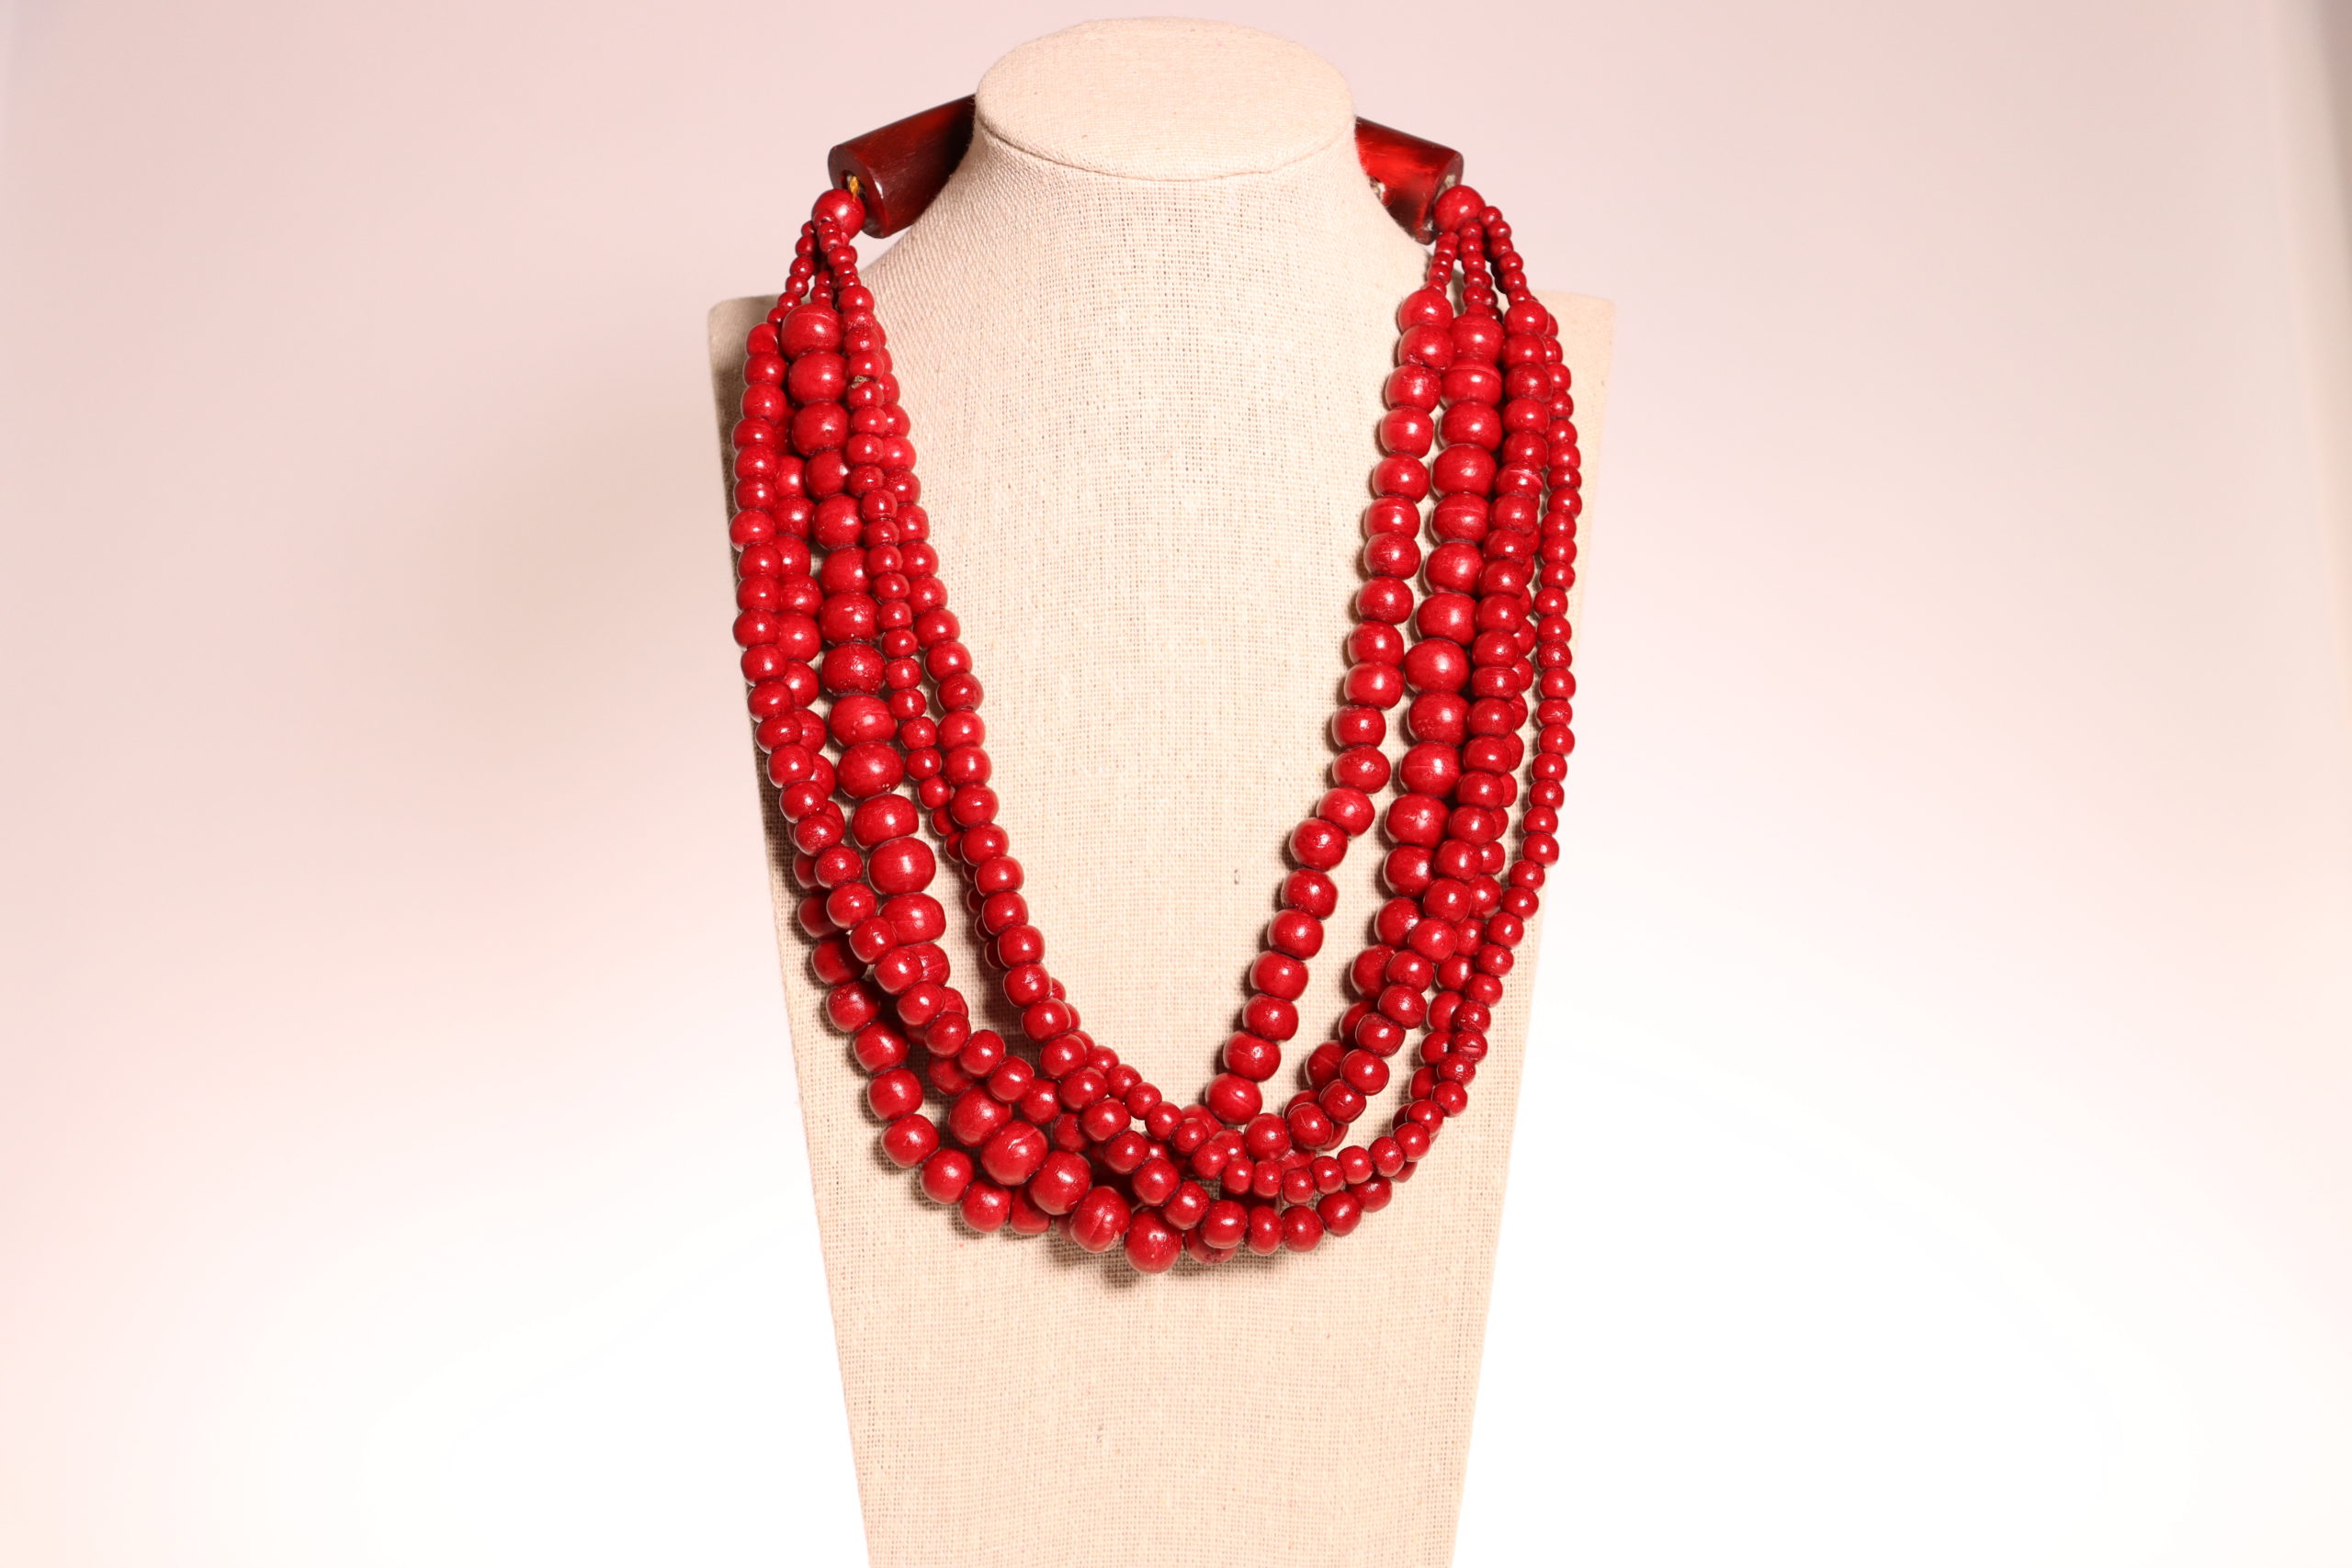 Women's Red Wooden Bead Necklace, Statement Necklace, Choose Color,  Lightweight Chunky Bead Necklace, Cranberry Necklace, Holiday Necklace 